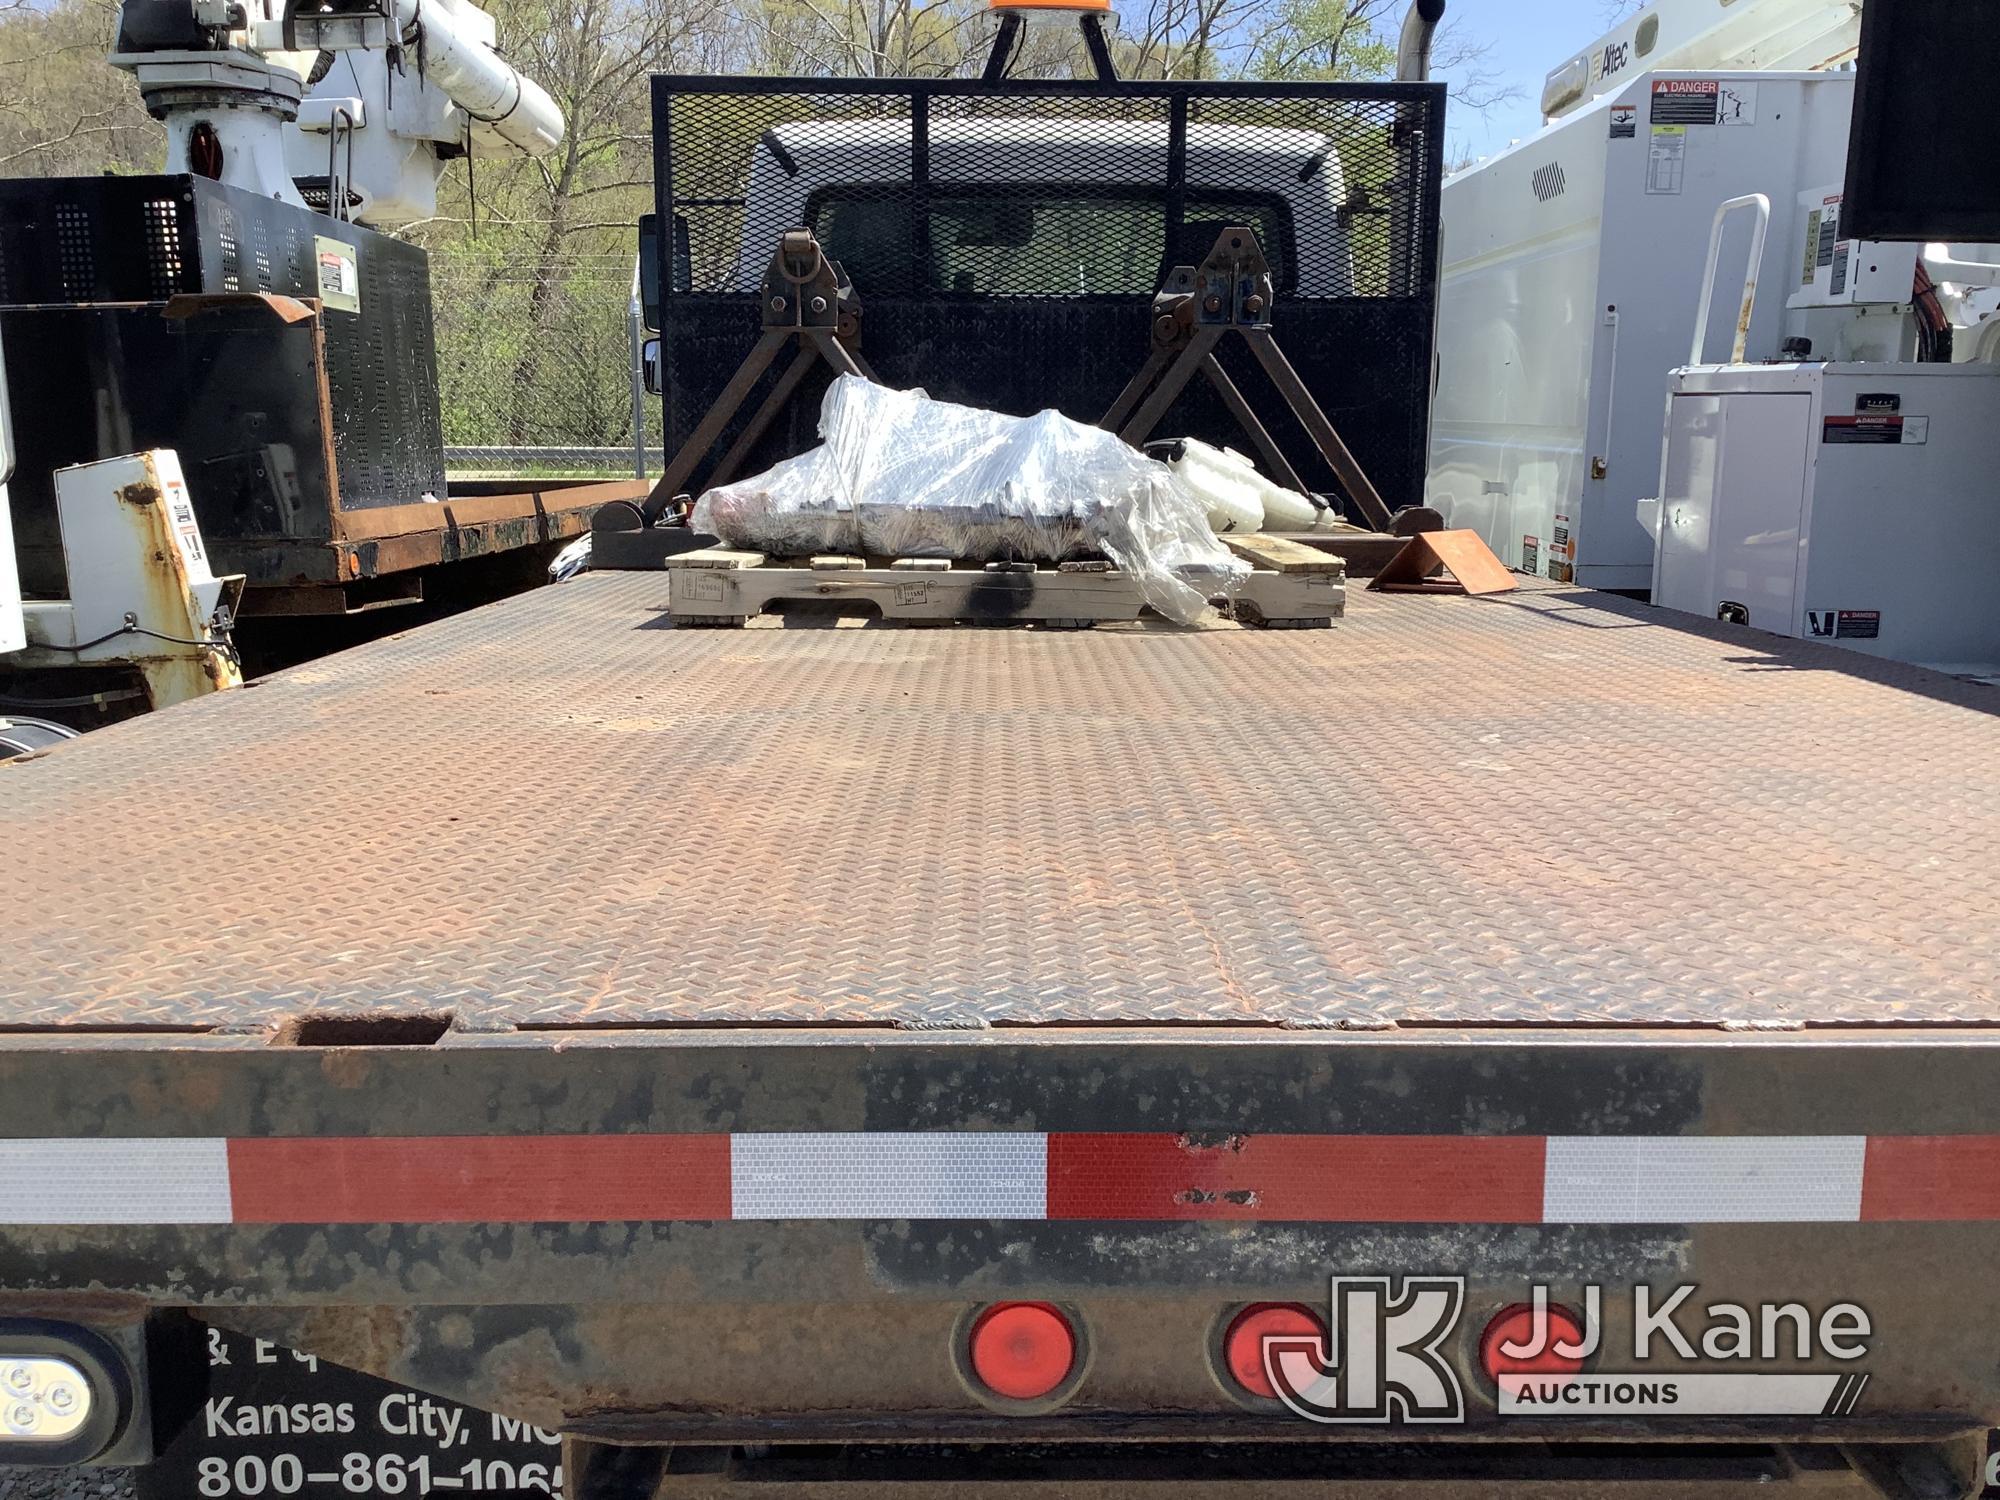 (Smock, PA) 2014 Freightliner M2 106 Flatbed Truck Not Running, Condition Unknown, Engine Disassembl